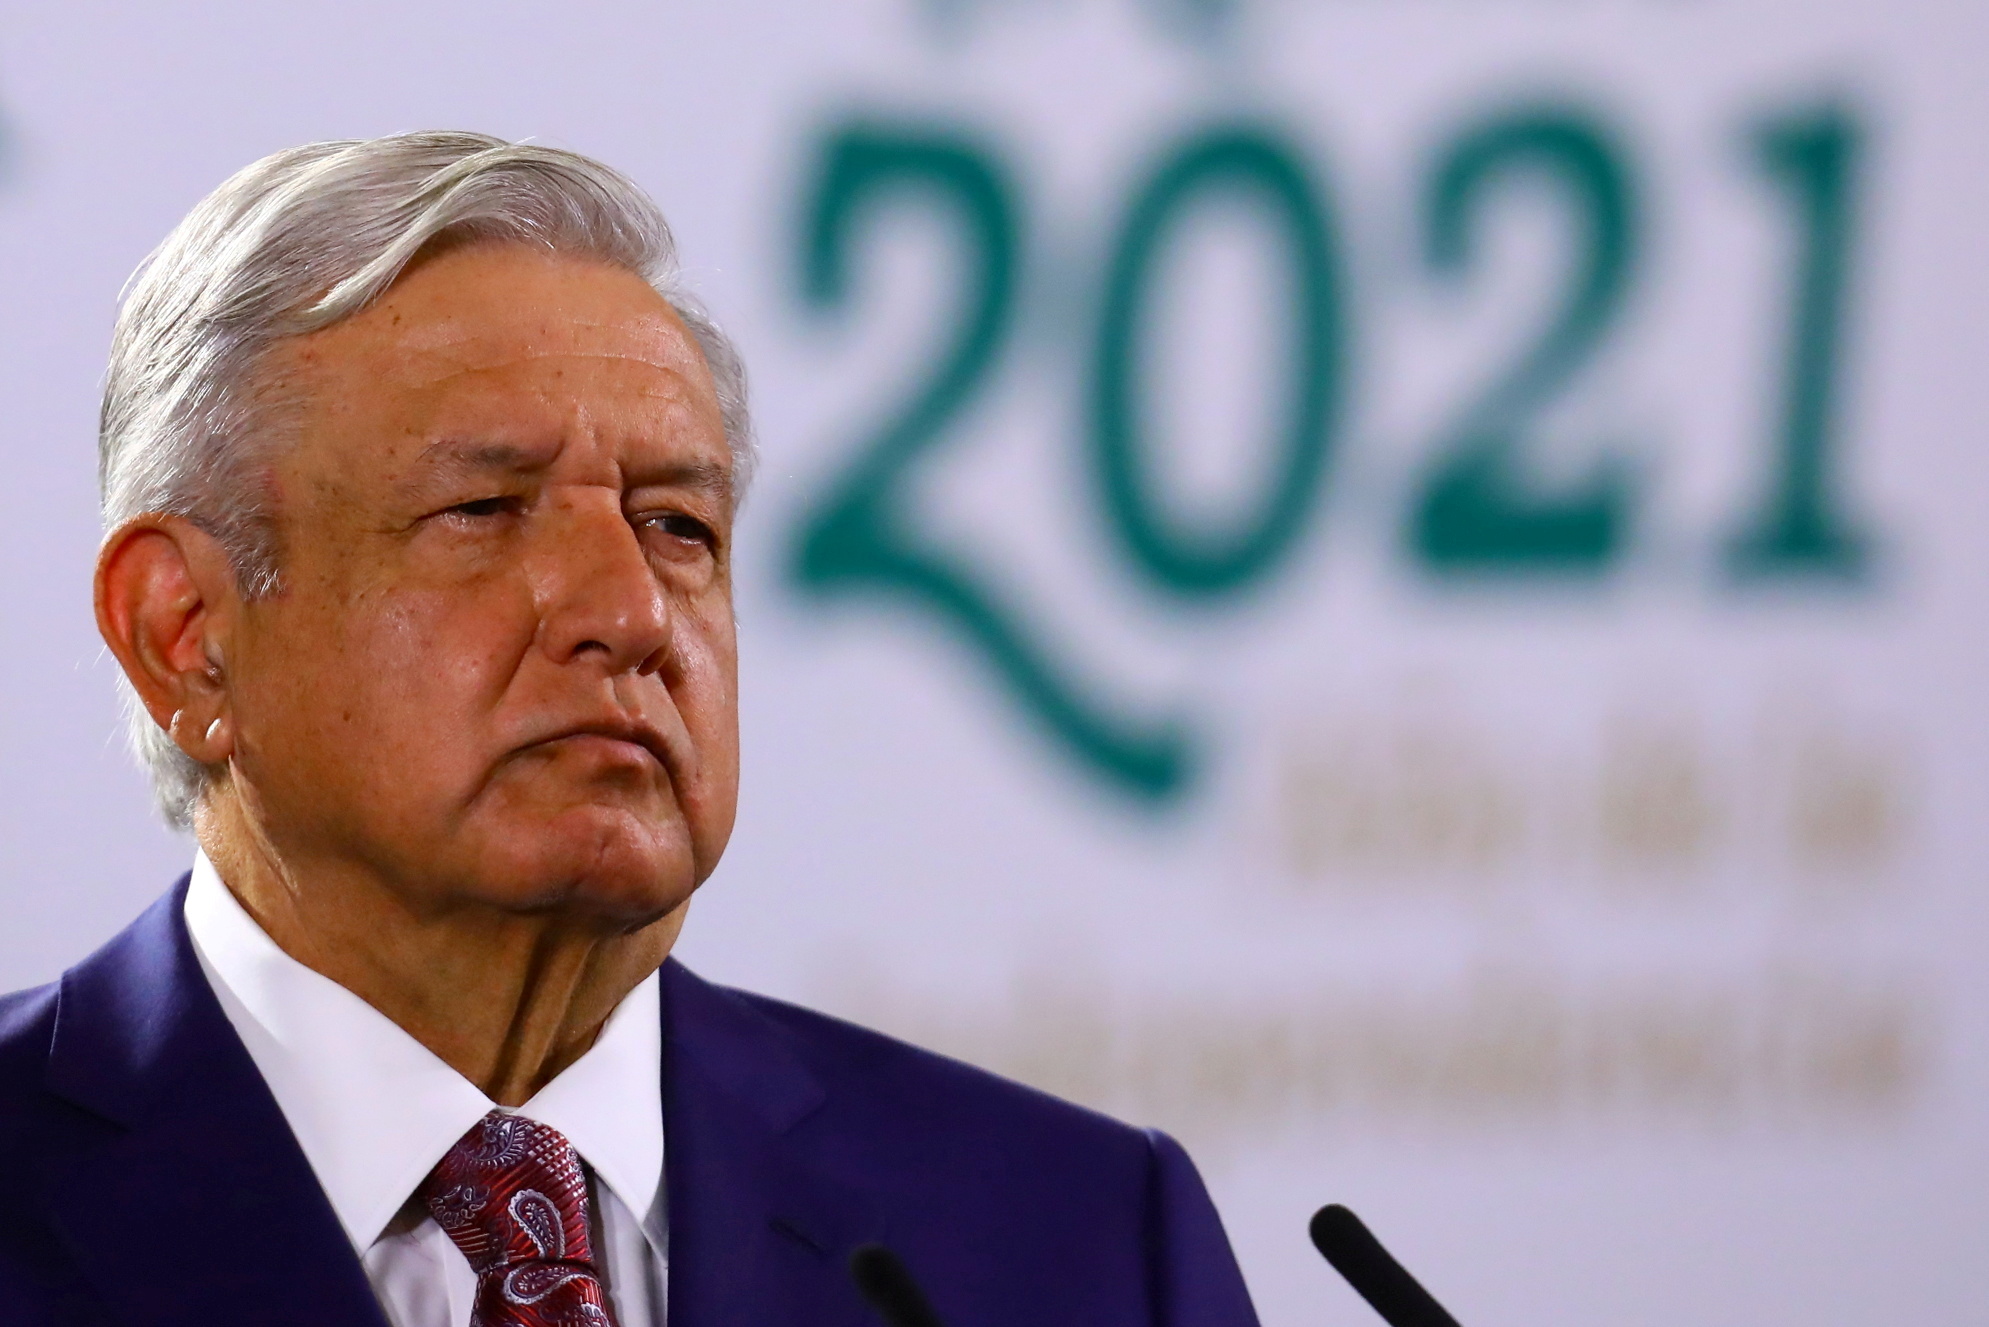 Mexico's President Lopez attends a news conference at the National Palace in Mexico City